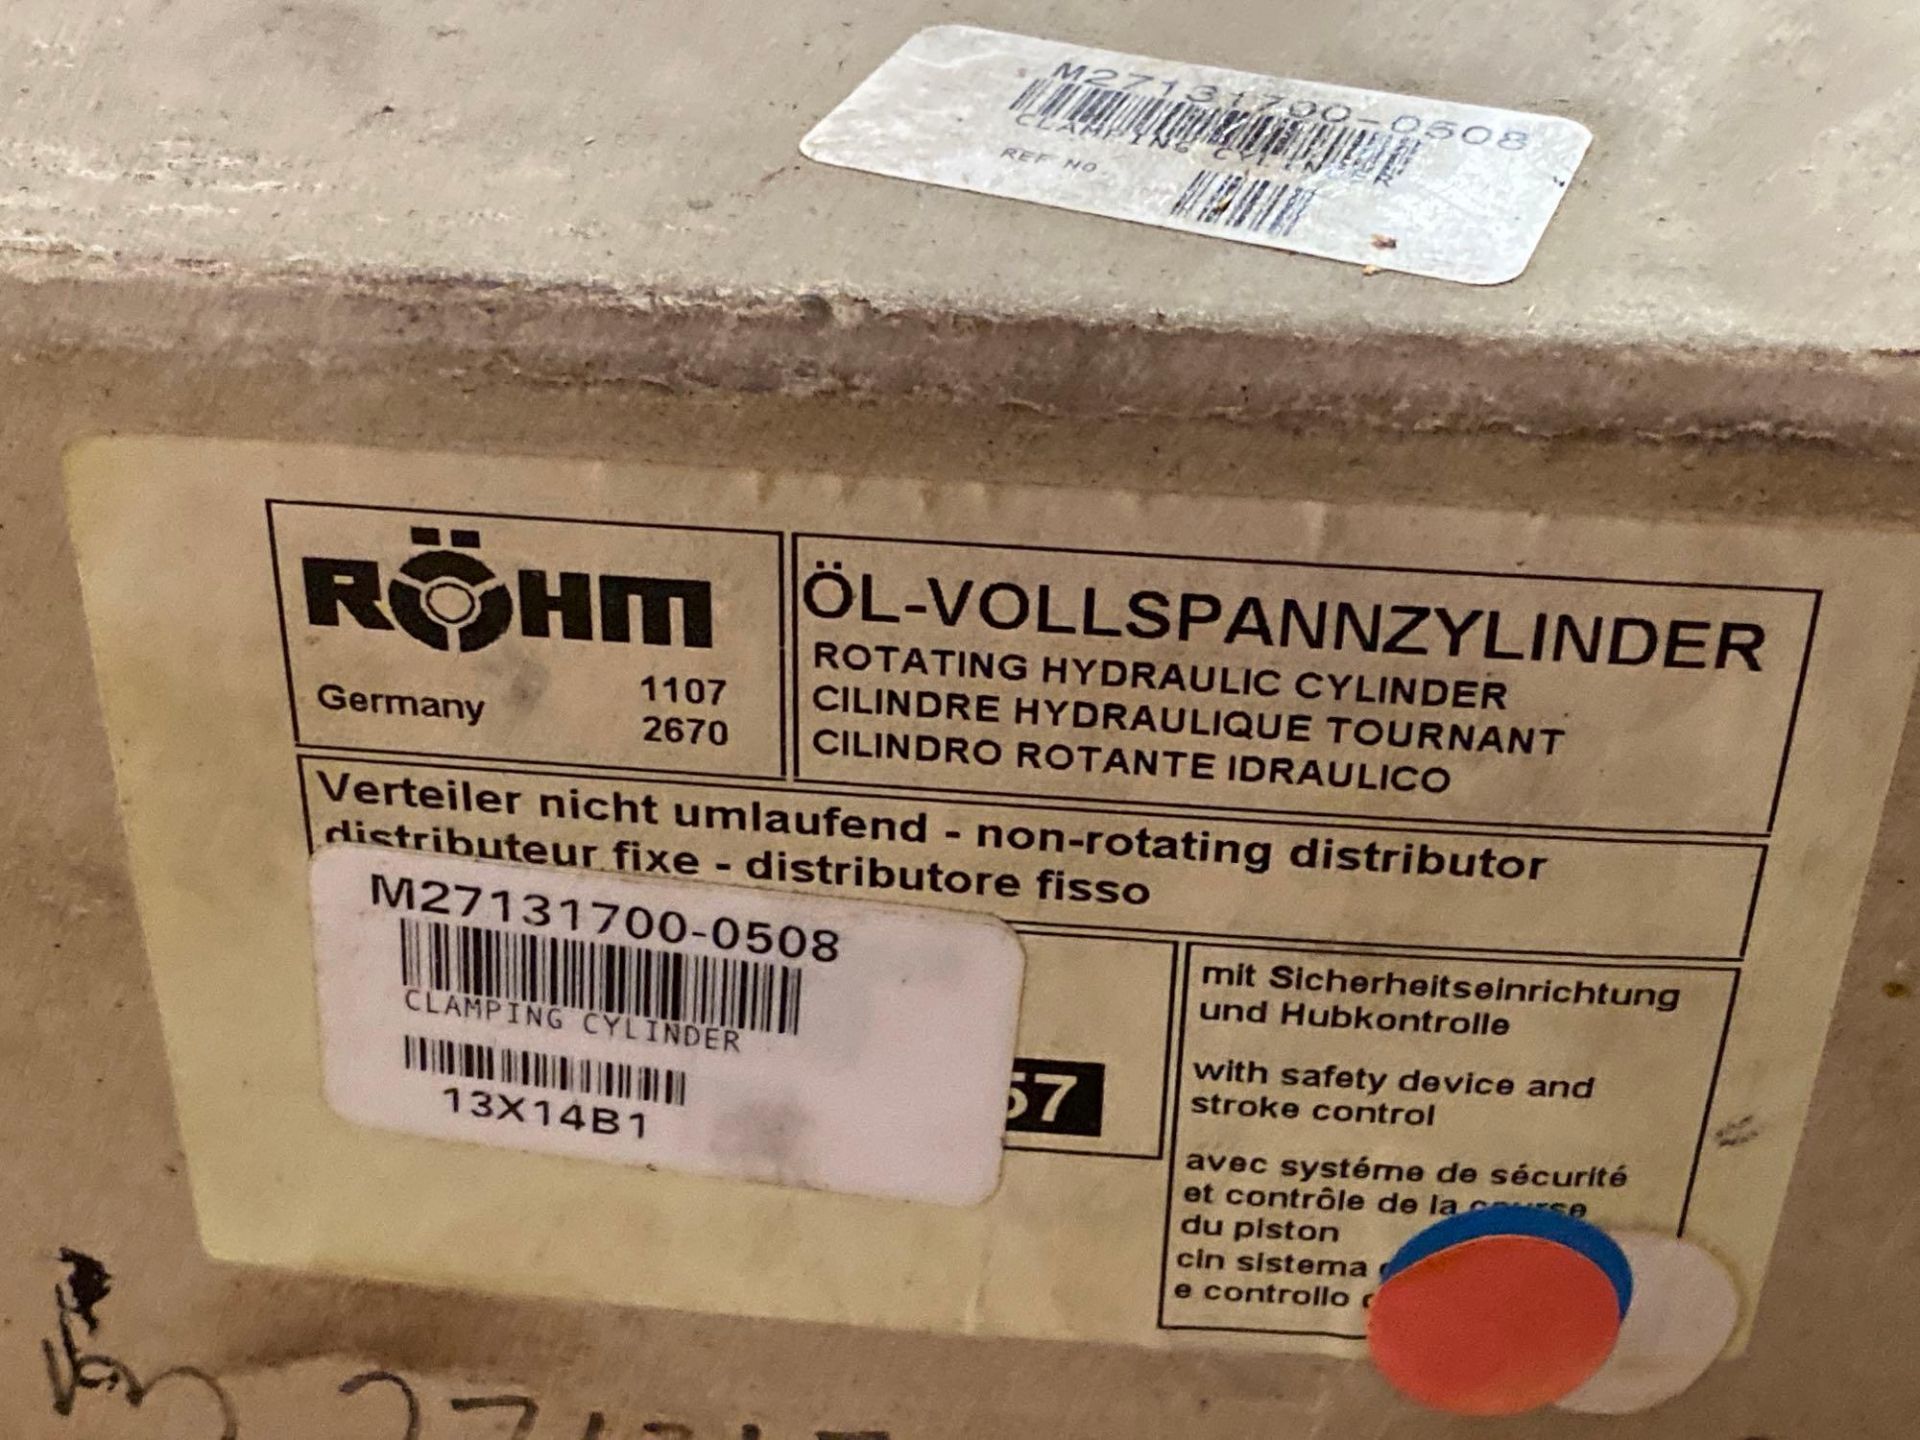 New in Box Rohm OVS 85 Rotating Hydraulic Cylinder - Image 3 of 4